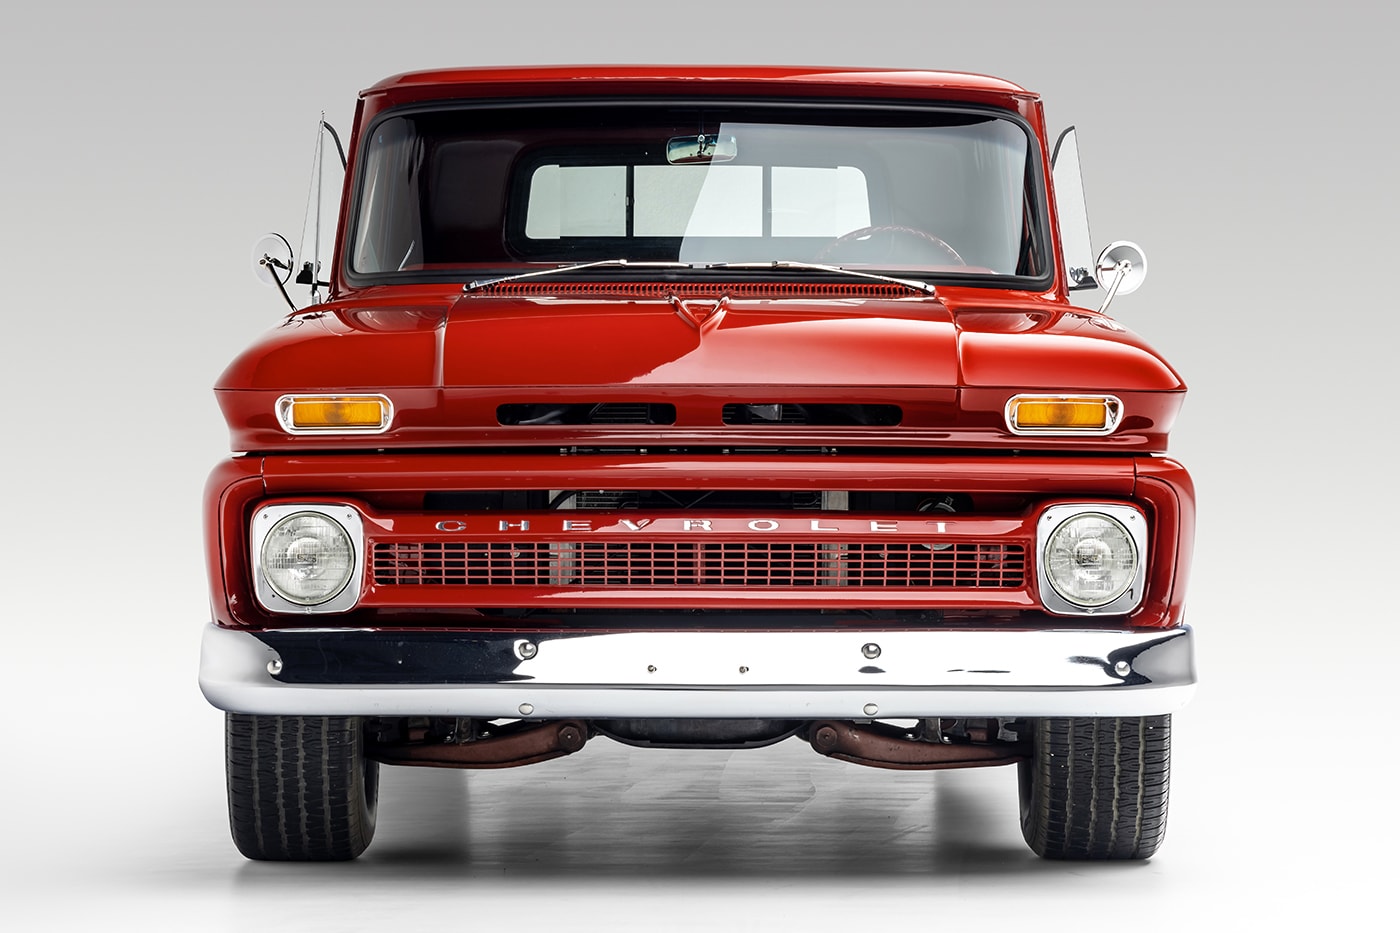 Cherry Los Angeles Holiday 2021 Raffle Announcement 1965 Chevrolet C10 Pickup Truck